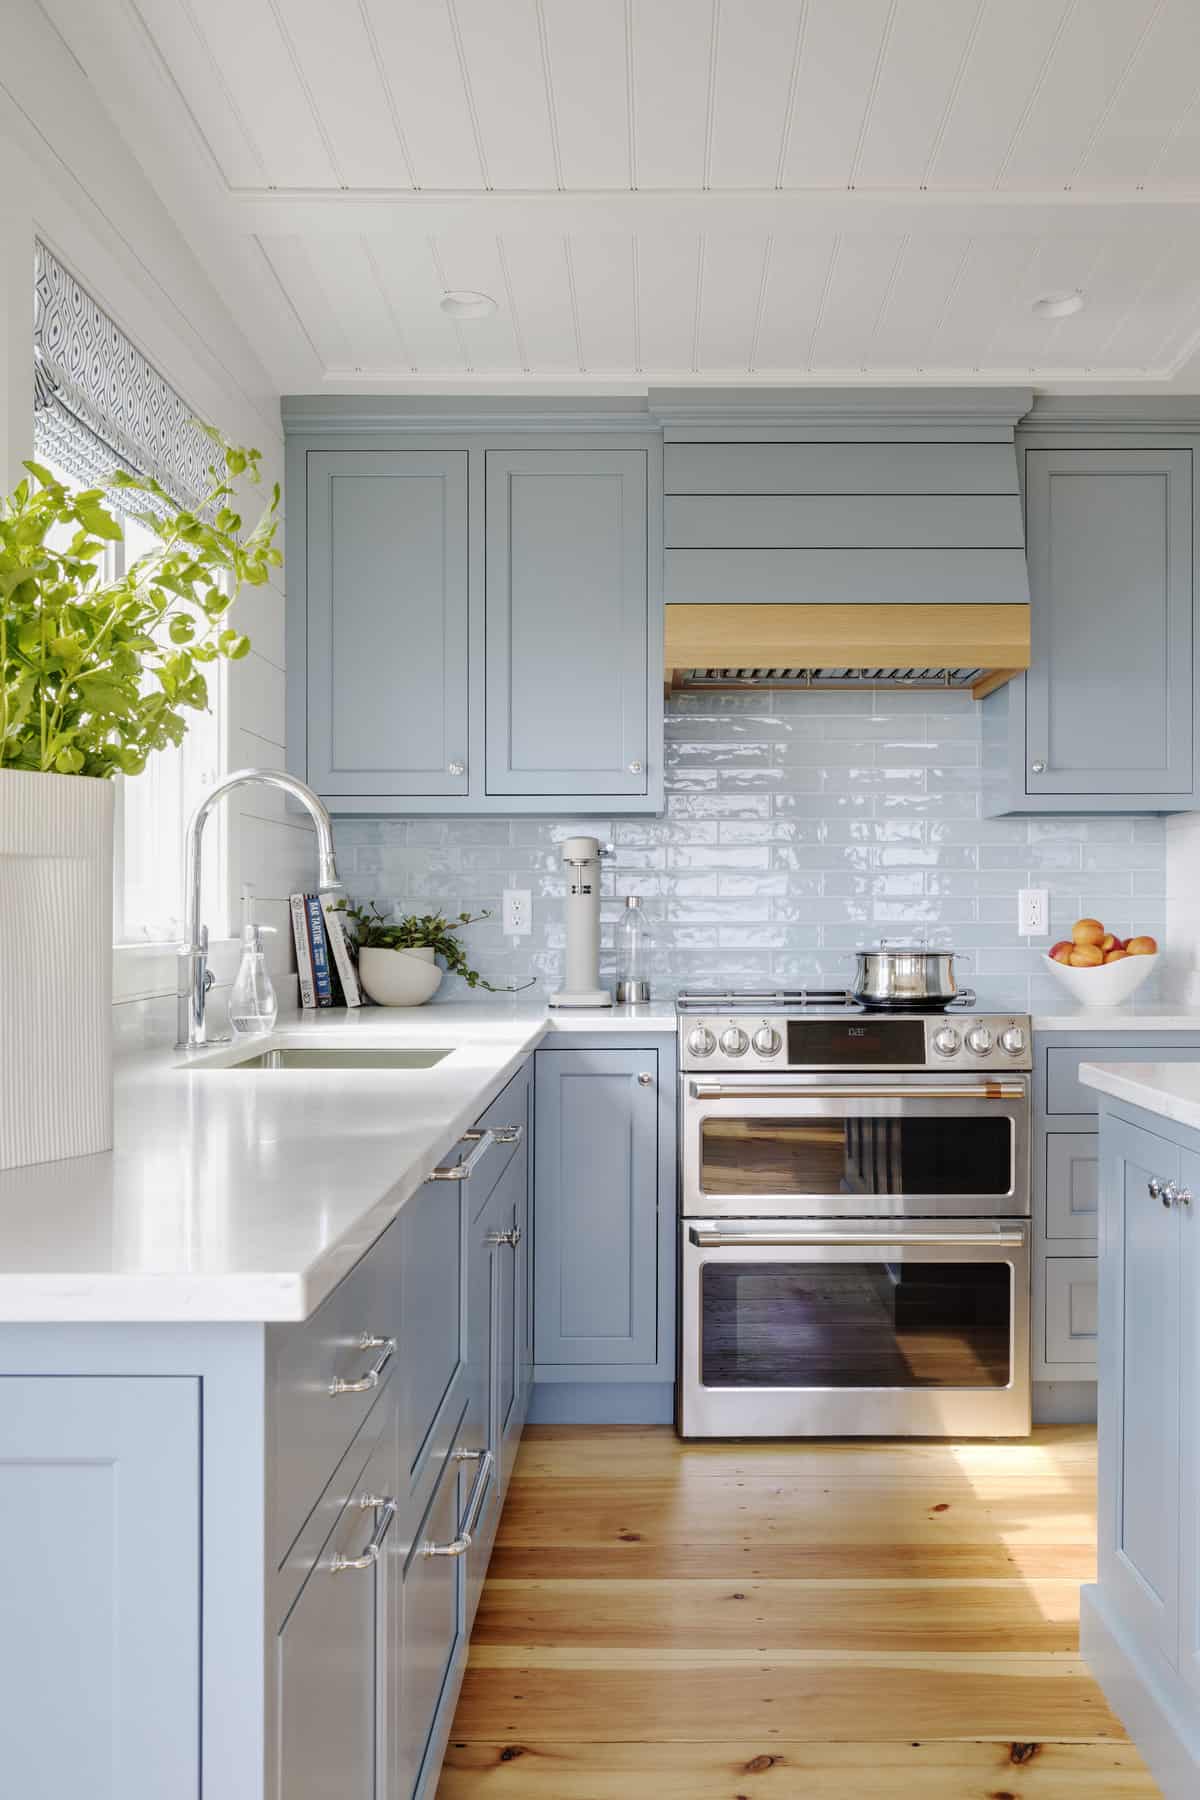 Lighter stone countertops and new shaker style blue cabinets offer a modern, subdued feel.